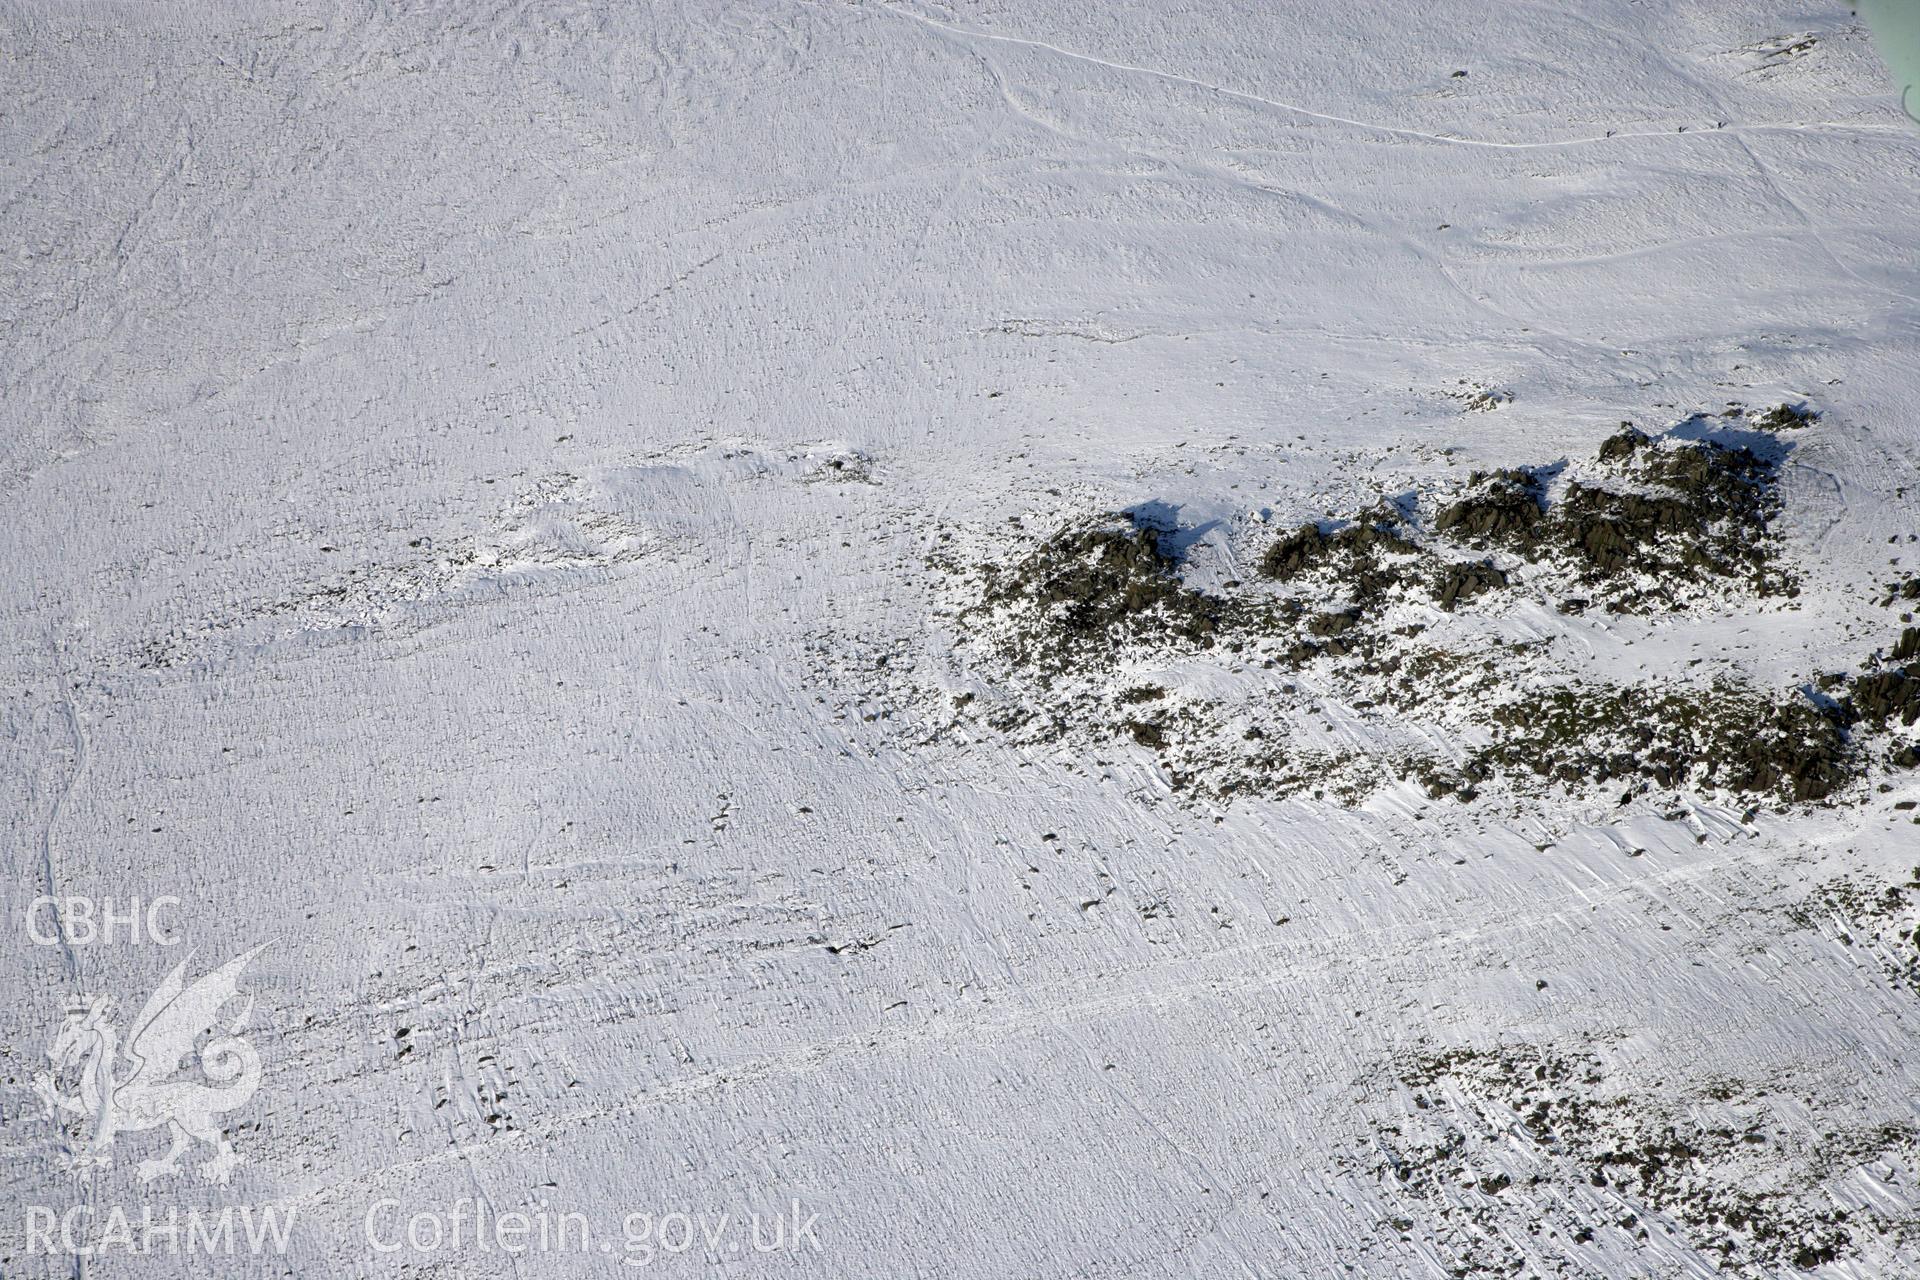 RCAHMW colour oblique photograph of Carn Meini Chambered Cairn. Taken by Toby Driver on 02/02/2012.